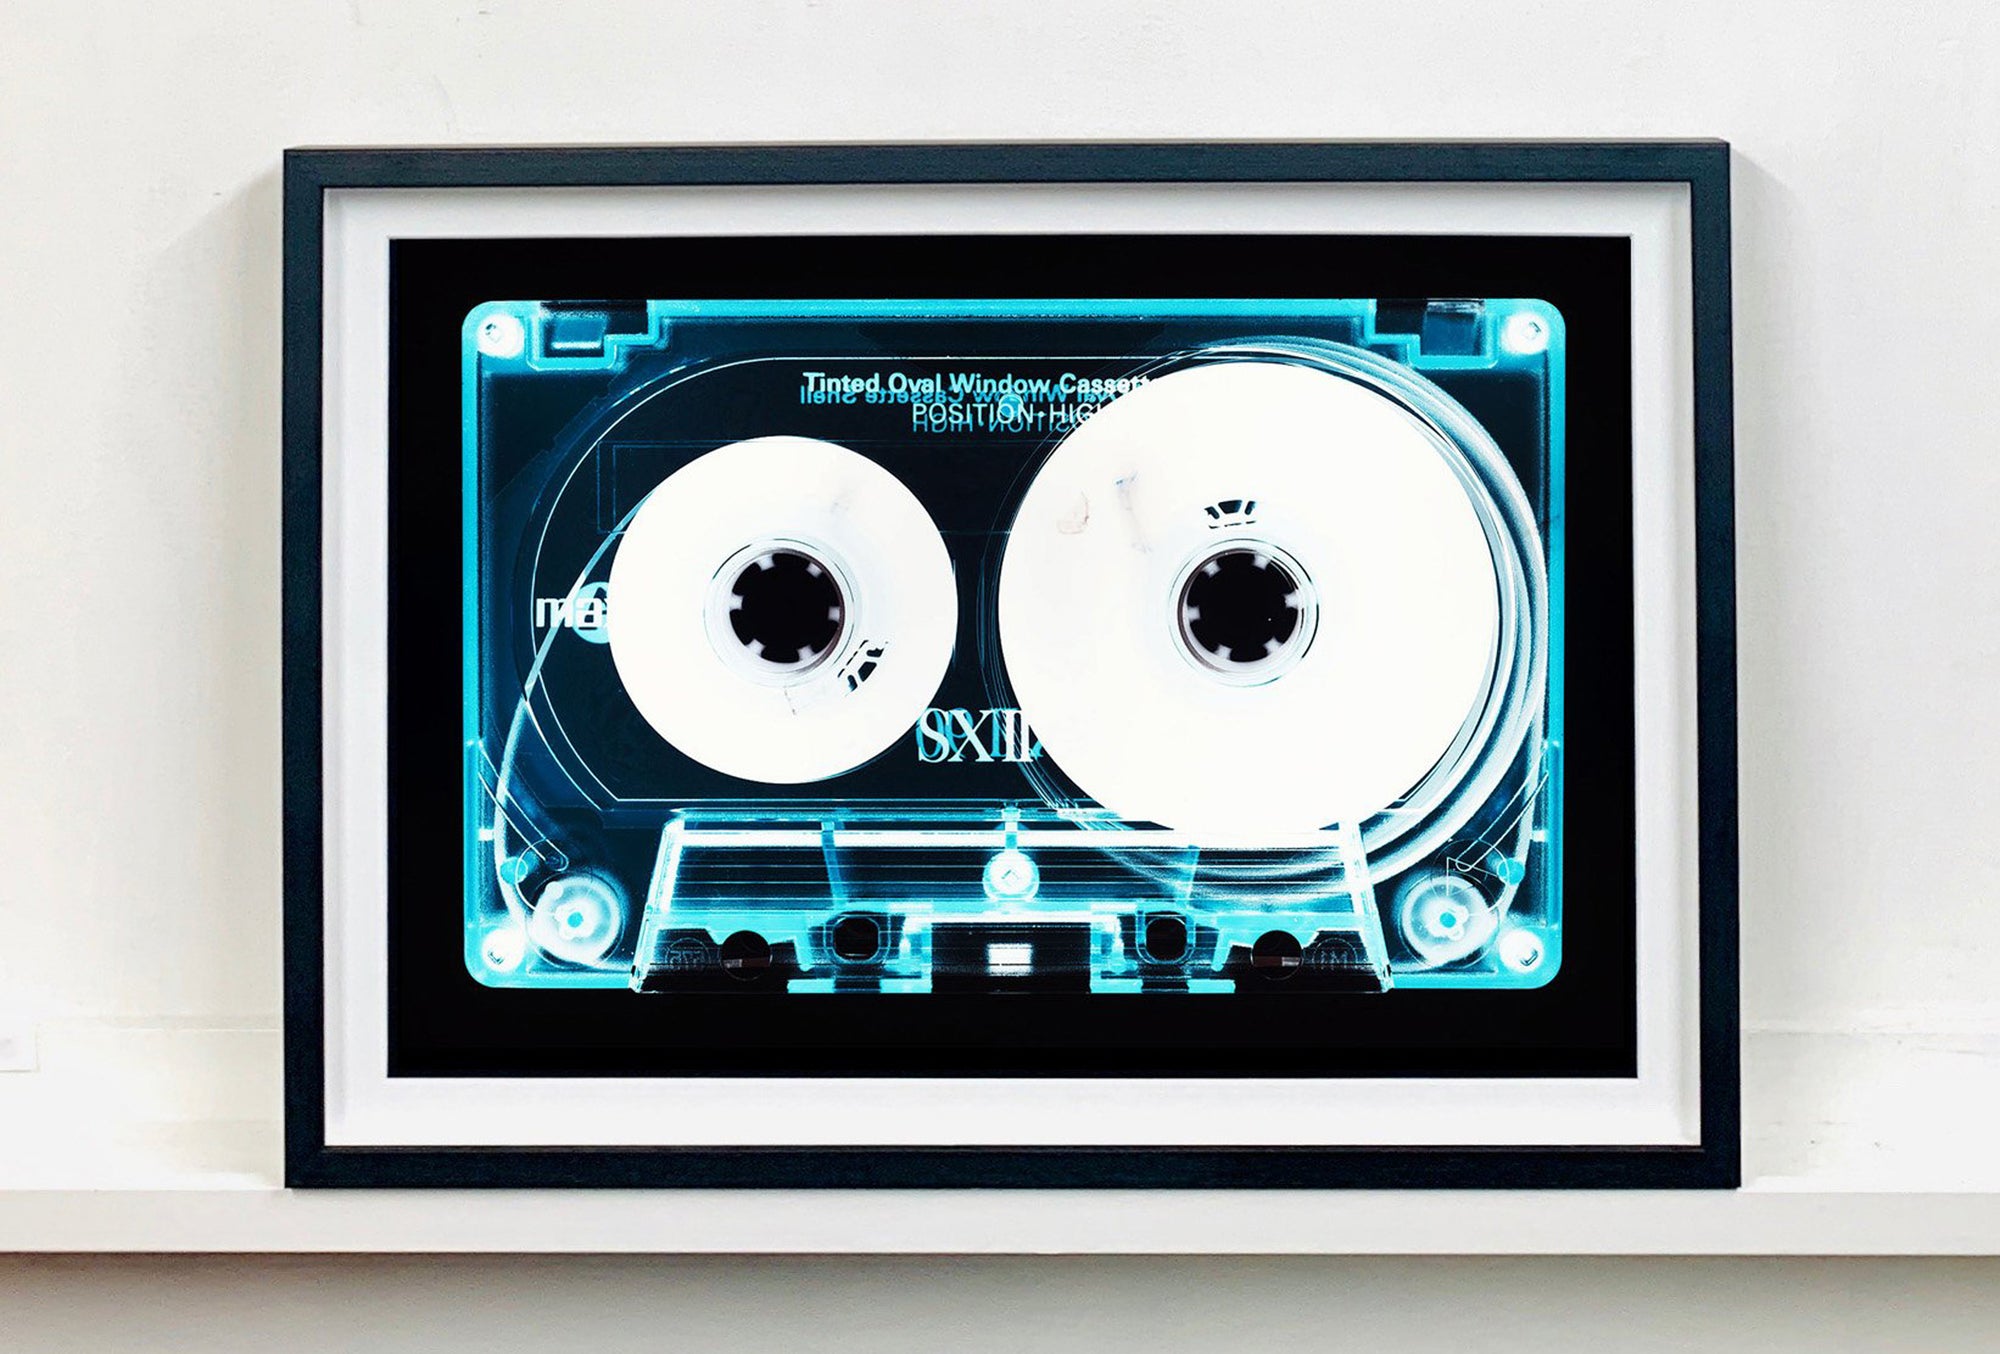 Tape Collection 'Tinted Oval Window Cassette'. The Heidler & Heeps collaborations are creative representations of Natasha Heidler and Richard Heeps’ personal past, and their personalities. Tapes are significant in both their lives and the work here is made from their own collections. Their unique process makes these artworks not inanimate objects, rather they have depth, texture, grit, and they even appear to move.